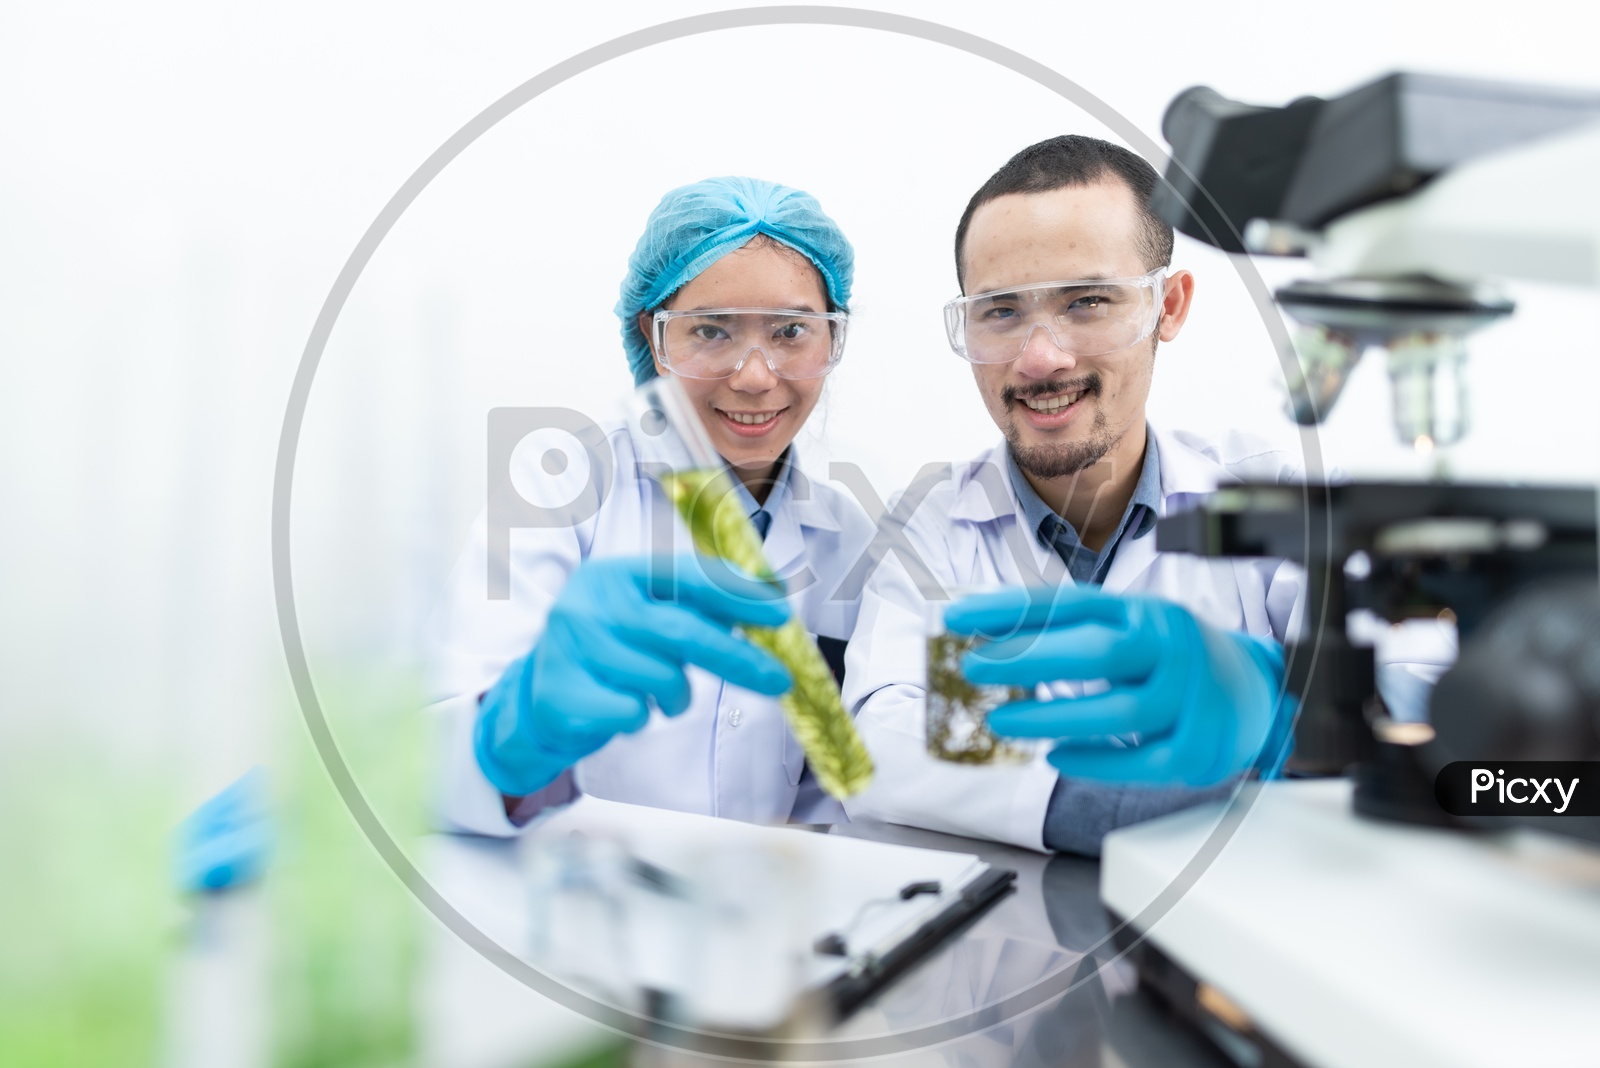 Asian Scientists Researching on Biofuel with Microscope in Foreground at Laboratory